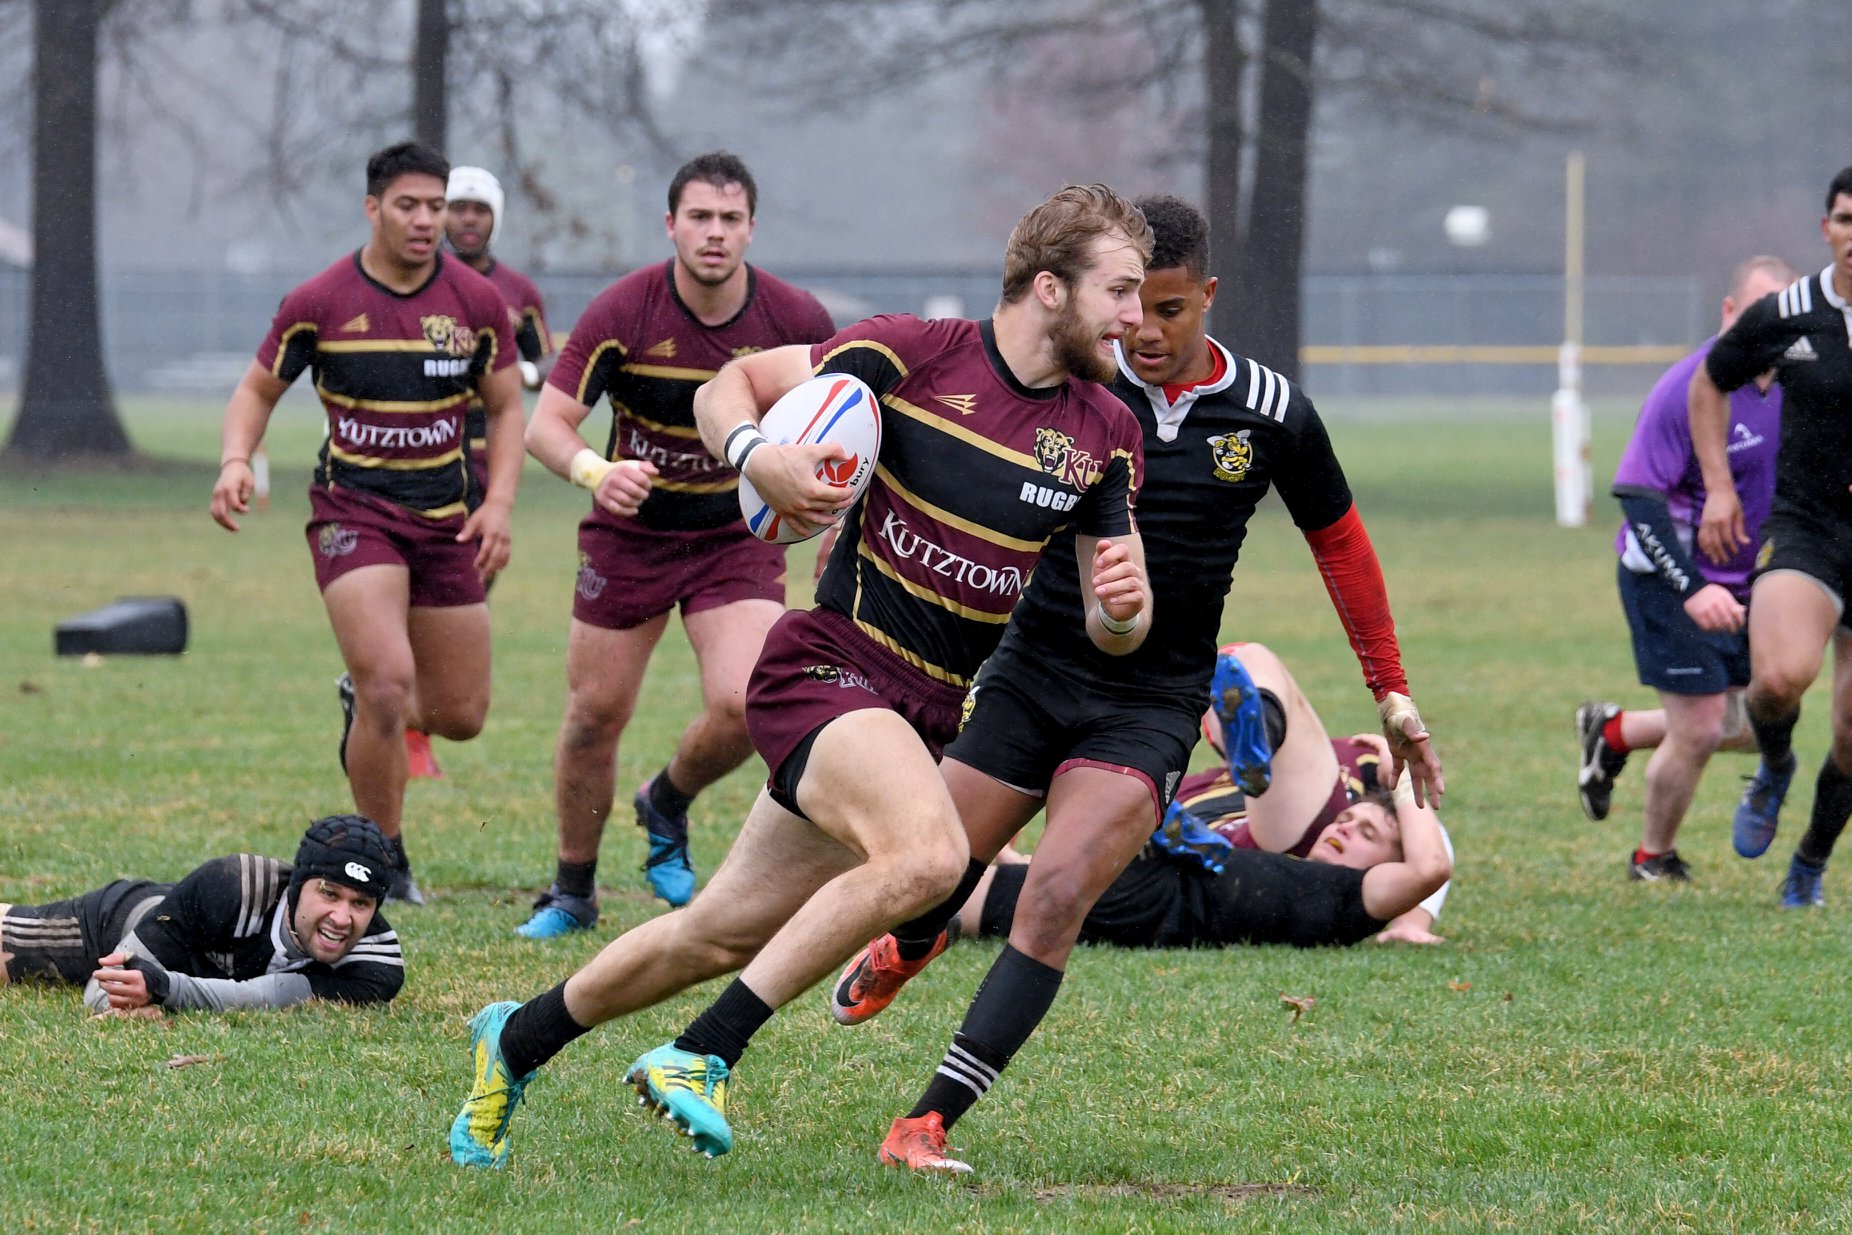 Men's Rugby player running with the ball